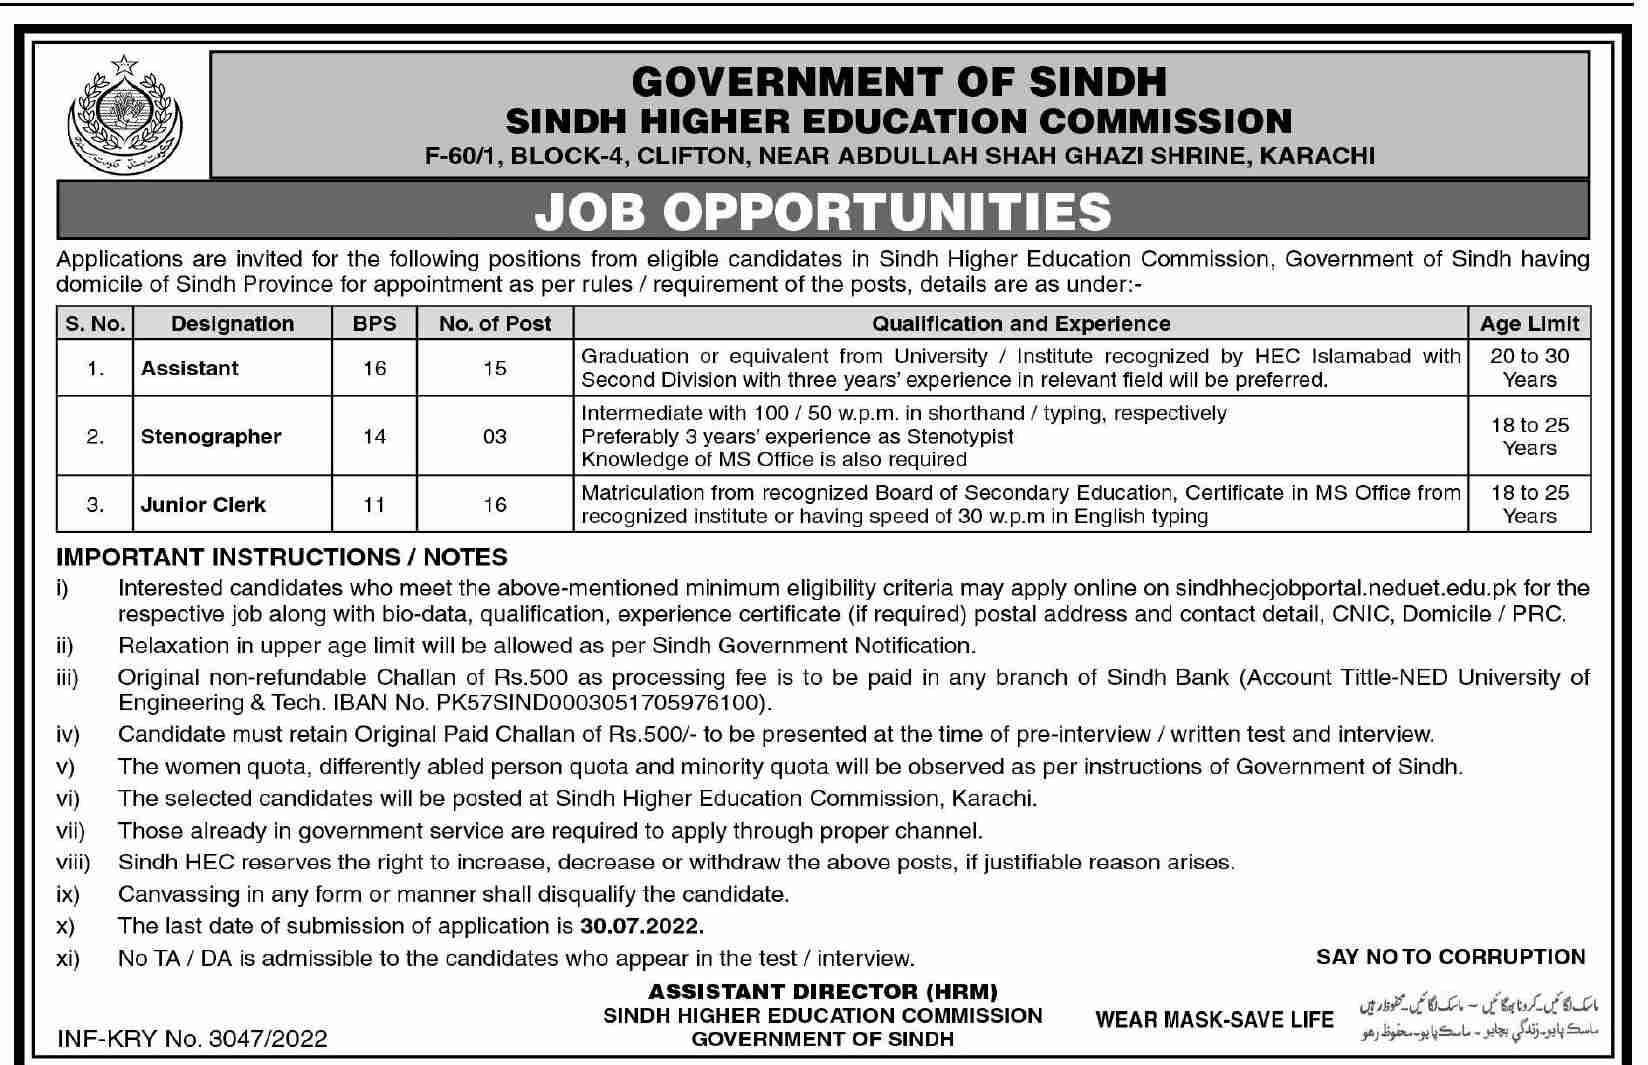 Vacant Positions at Sindh Higher Education Commission 2022 | Pak Jobs